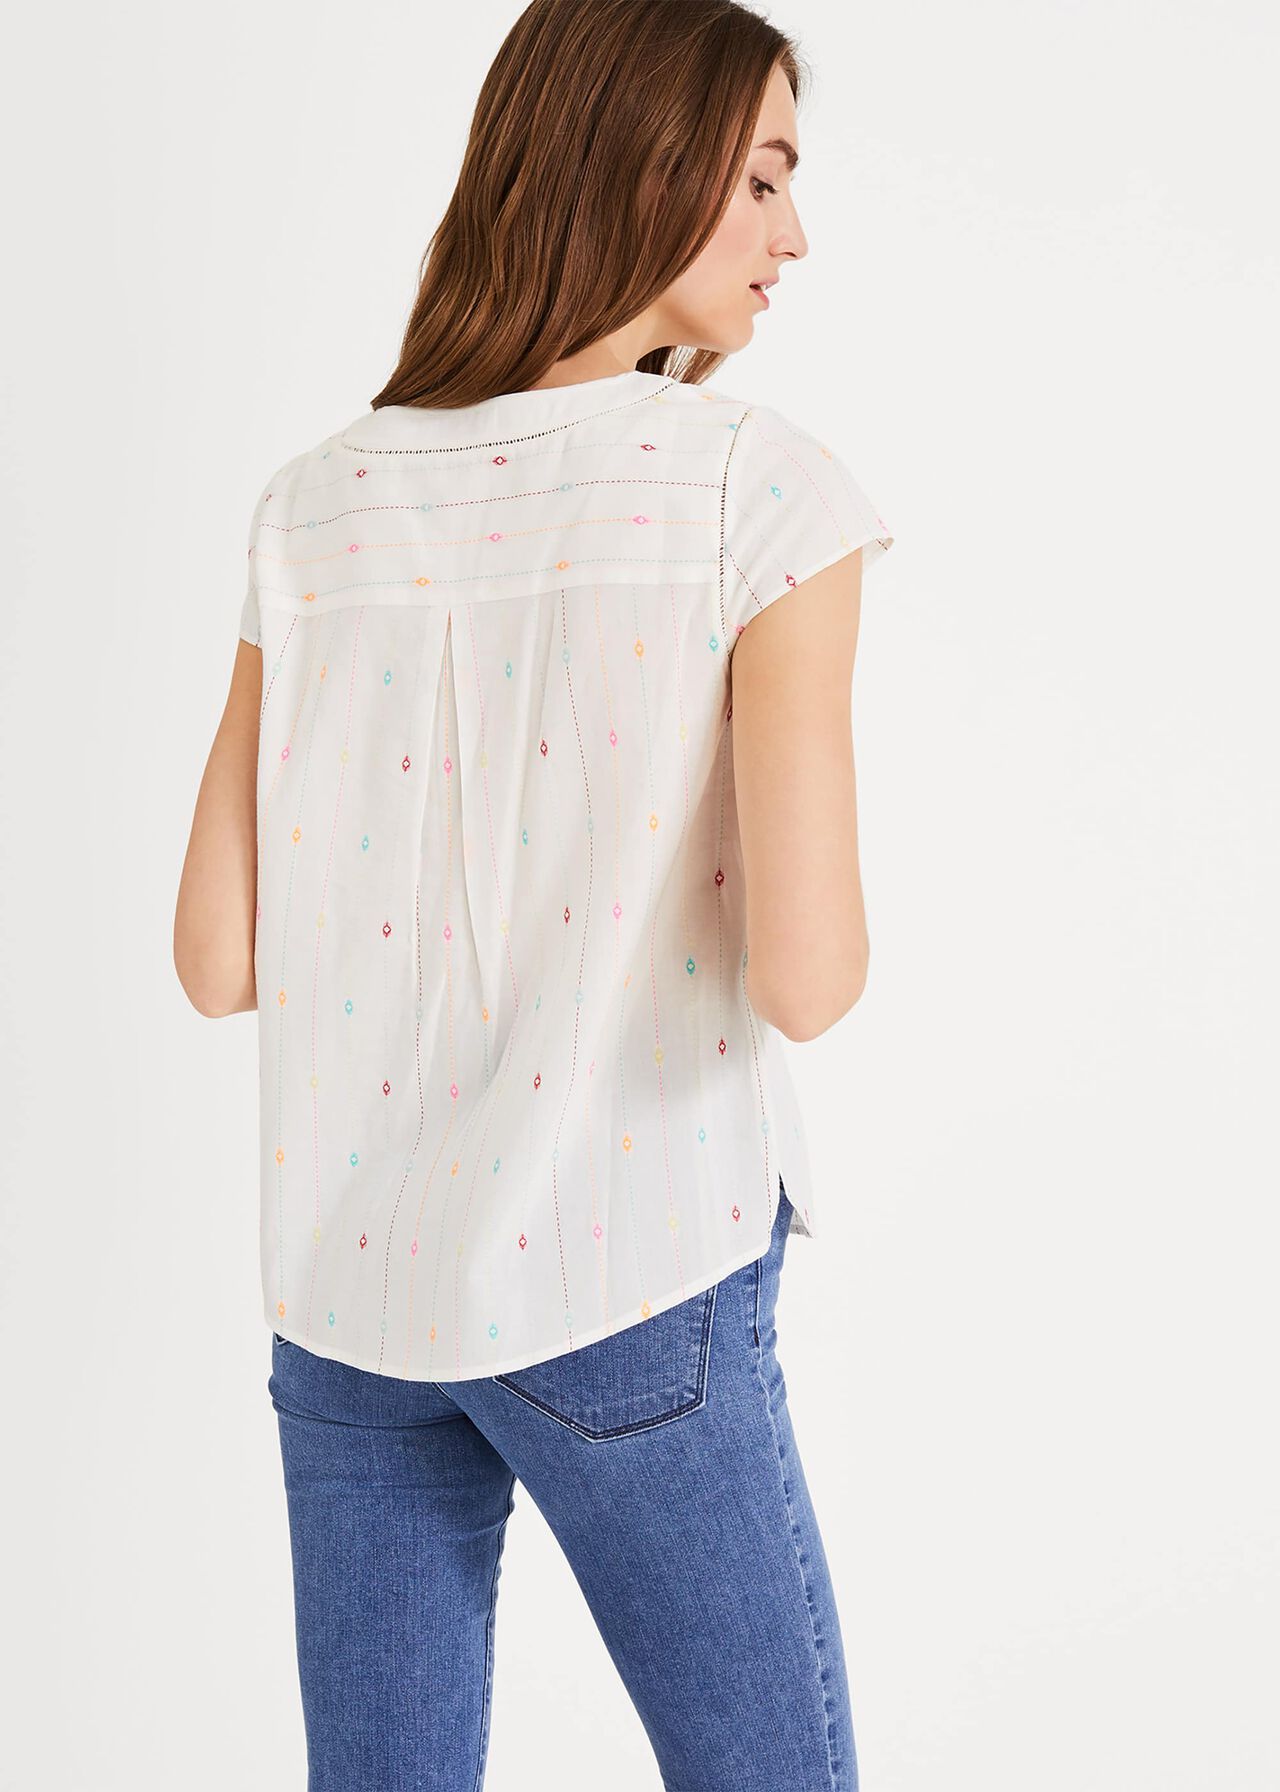 Helen-Lucy Blouse